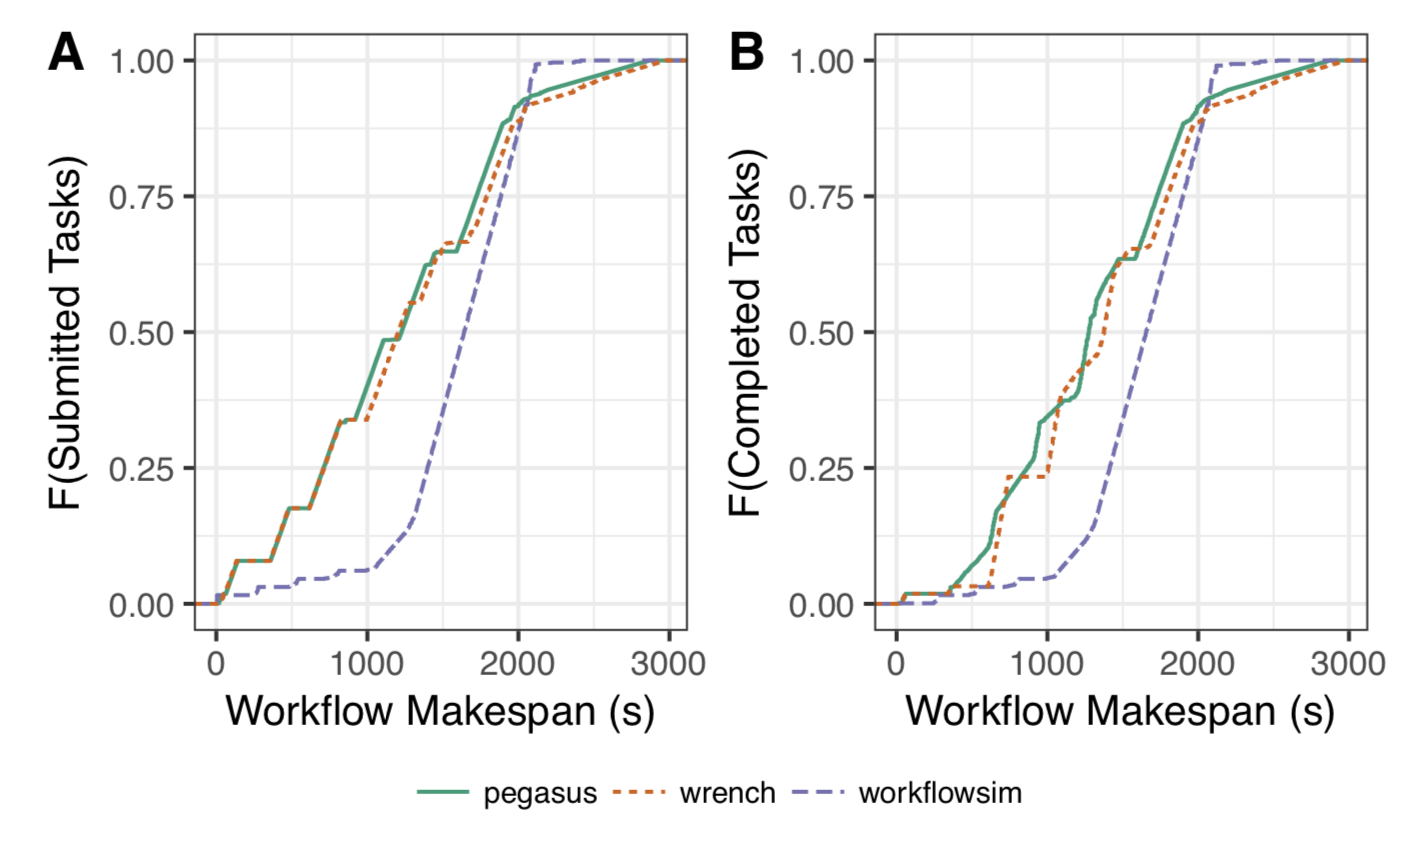 Running Accurate, Scalable, and Reproducible Simulations of Distributed Systems with WRENCH